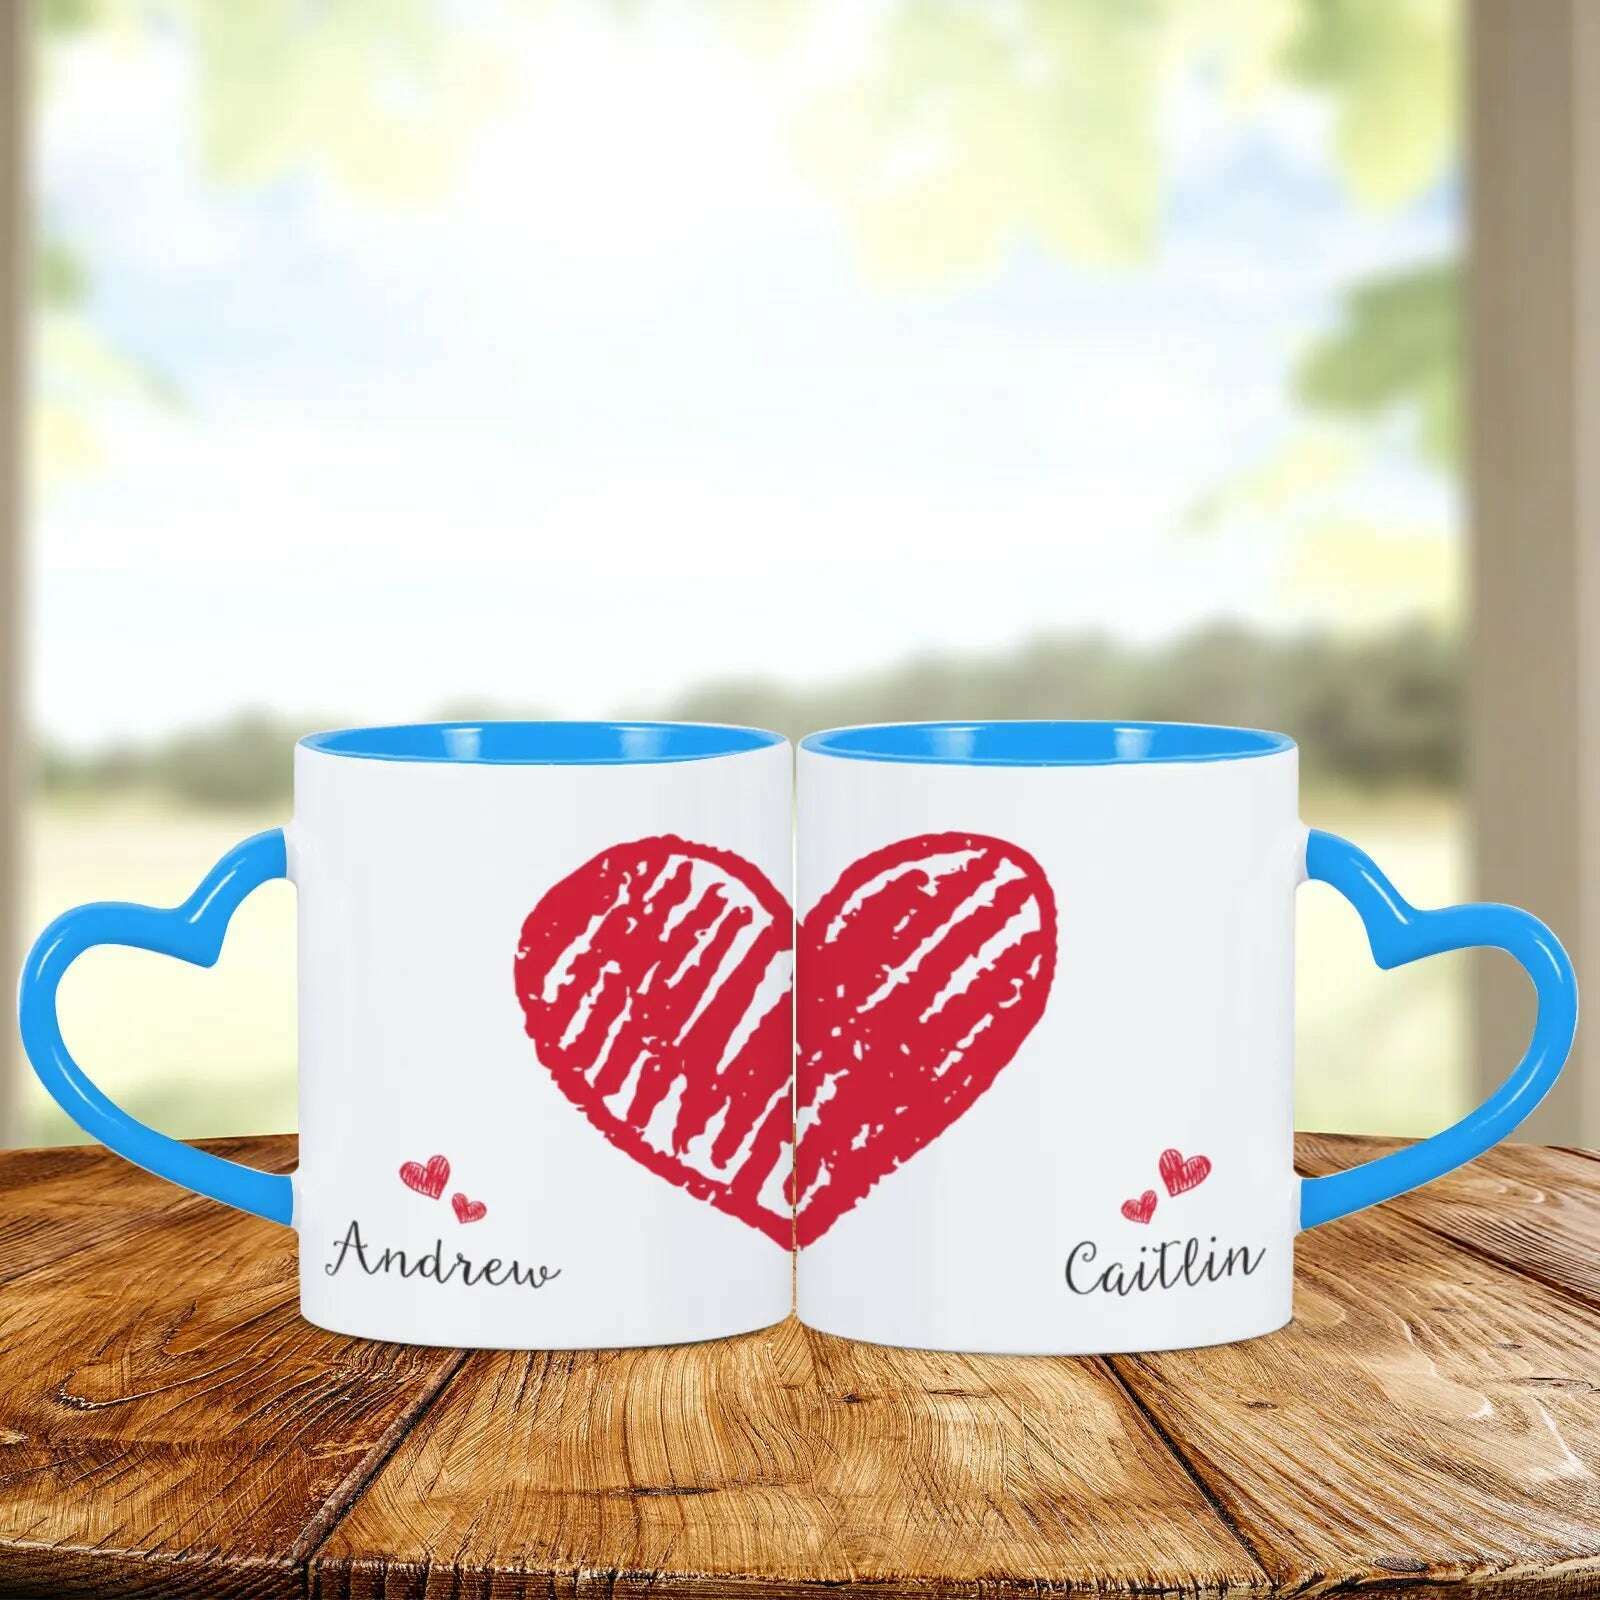 KIMLUD, 2pc Heart Handle Personalized Name Couple Coffee Mug for Girlfriend Wife Husband Valentine's Day present for Couples Coffee Mugs, Blue / 325ml, KIMLUD Women's Clothes